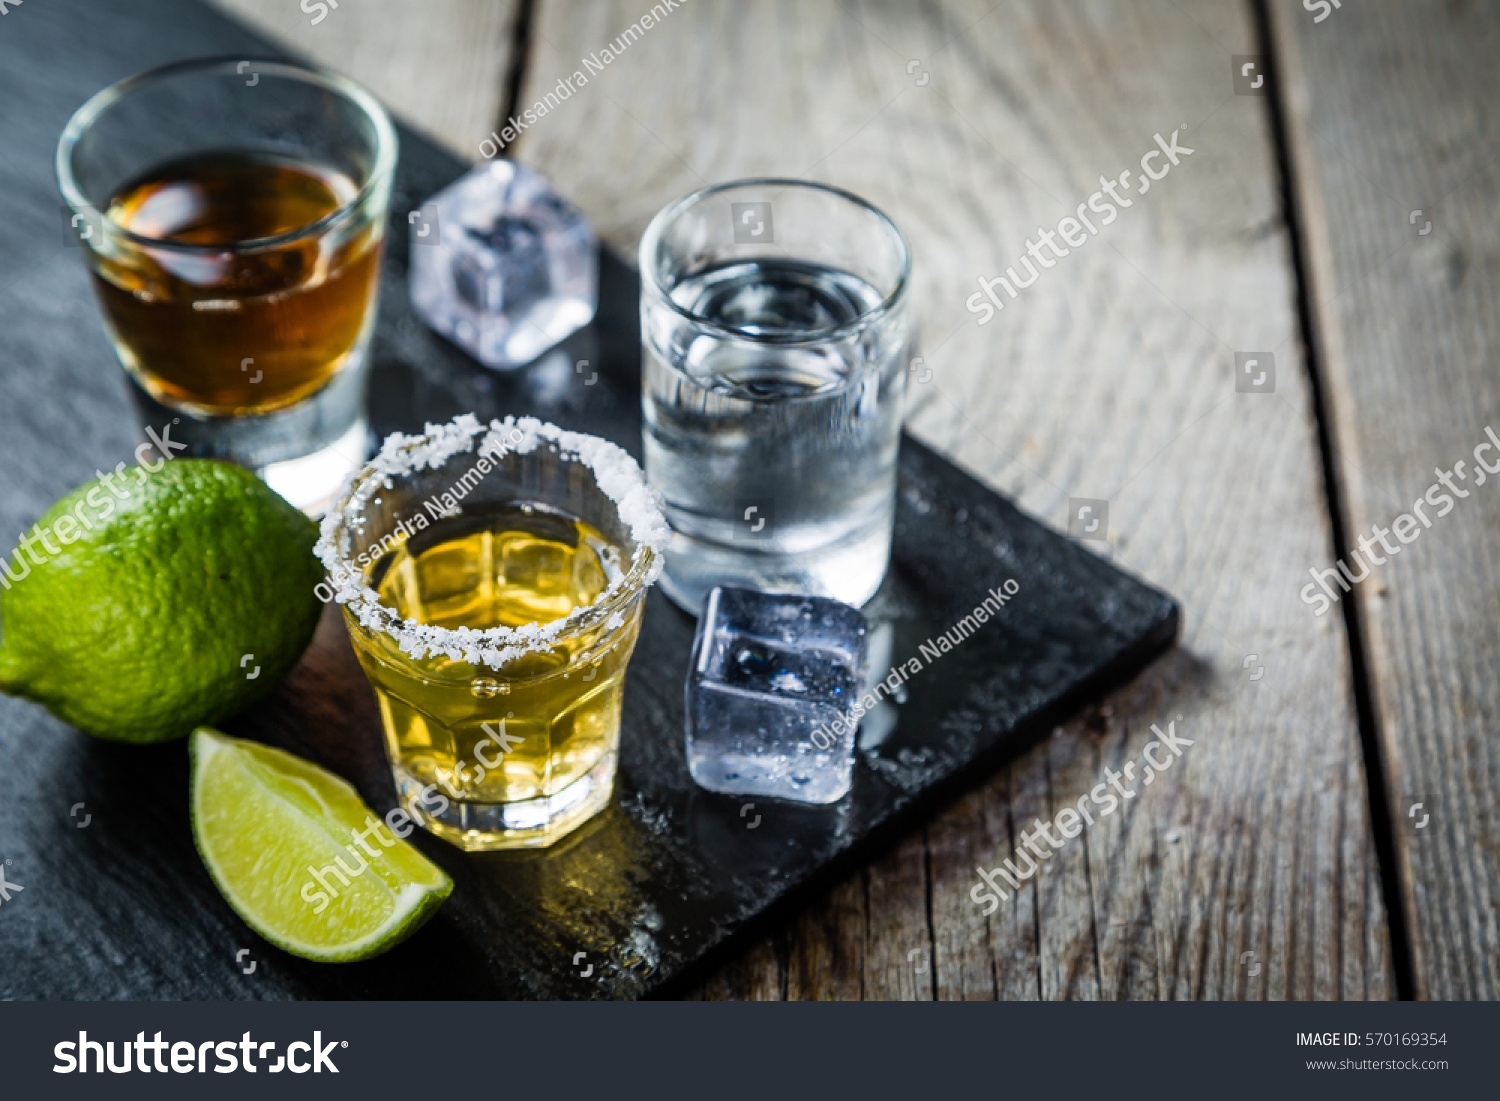 Selection of alcoholic drinks on rustic wood background #570169354